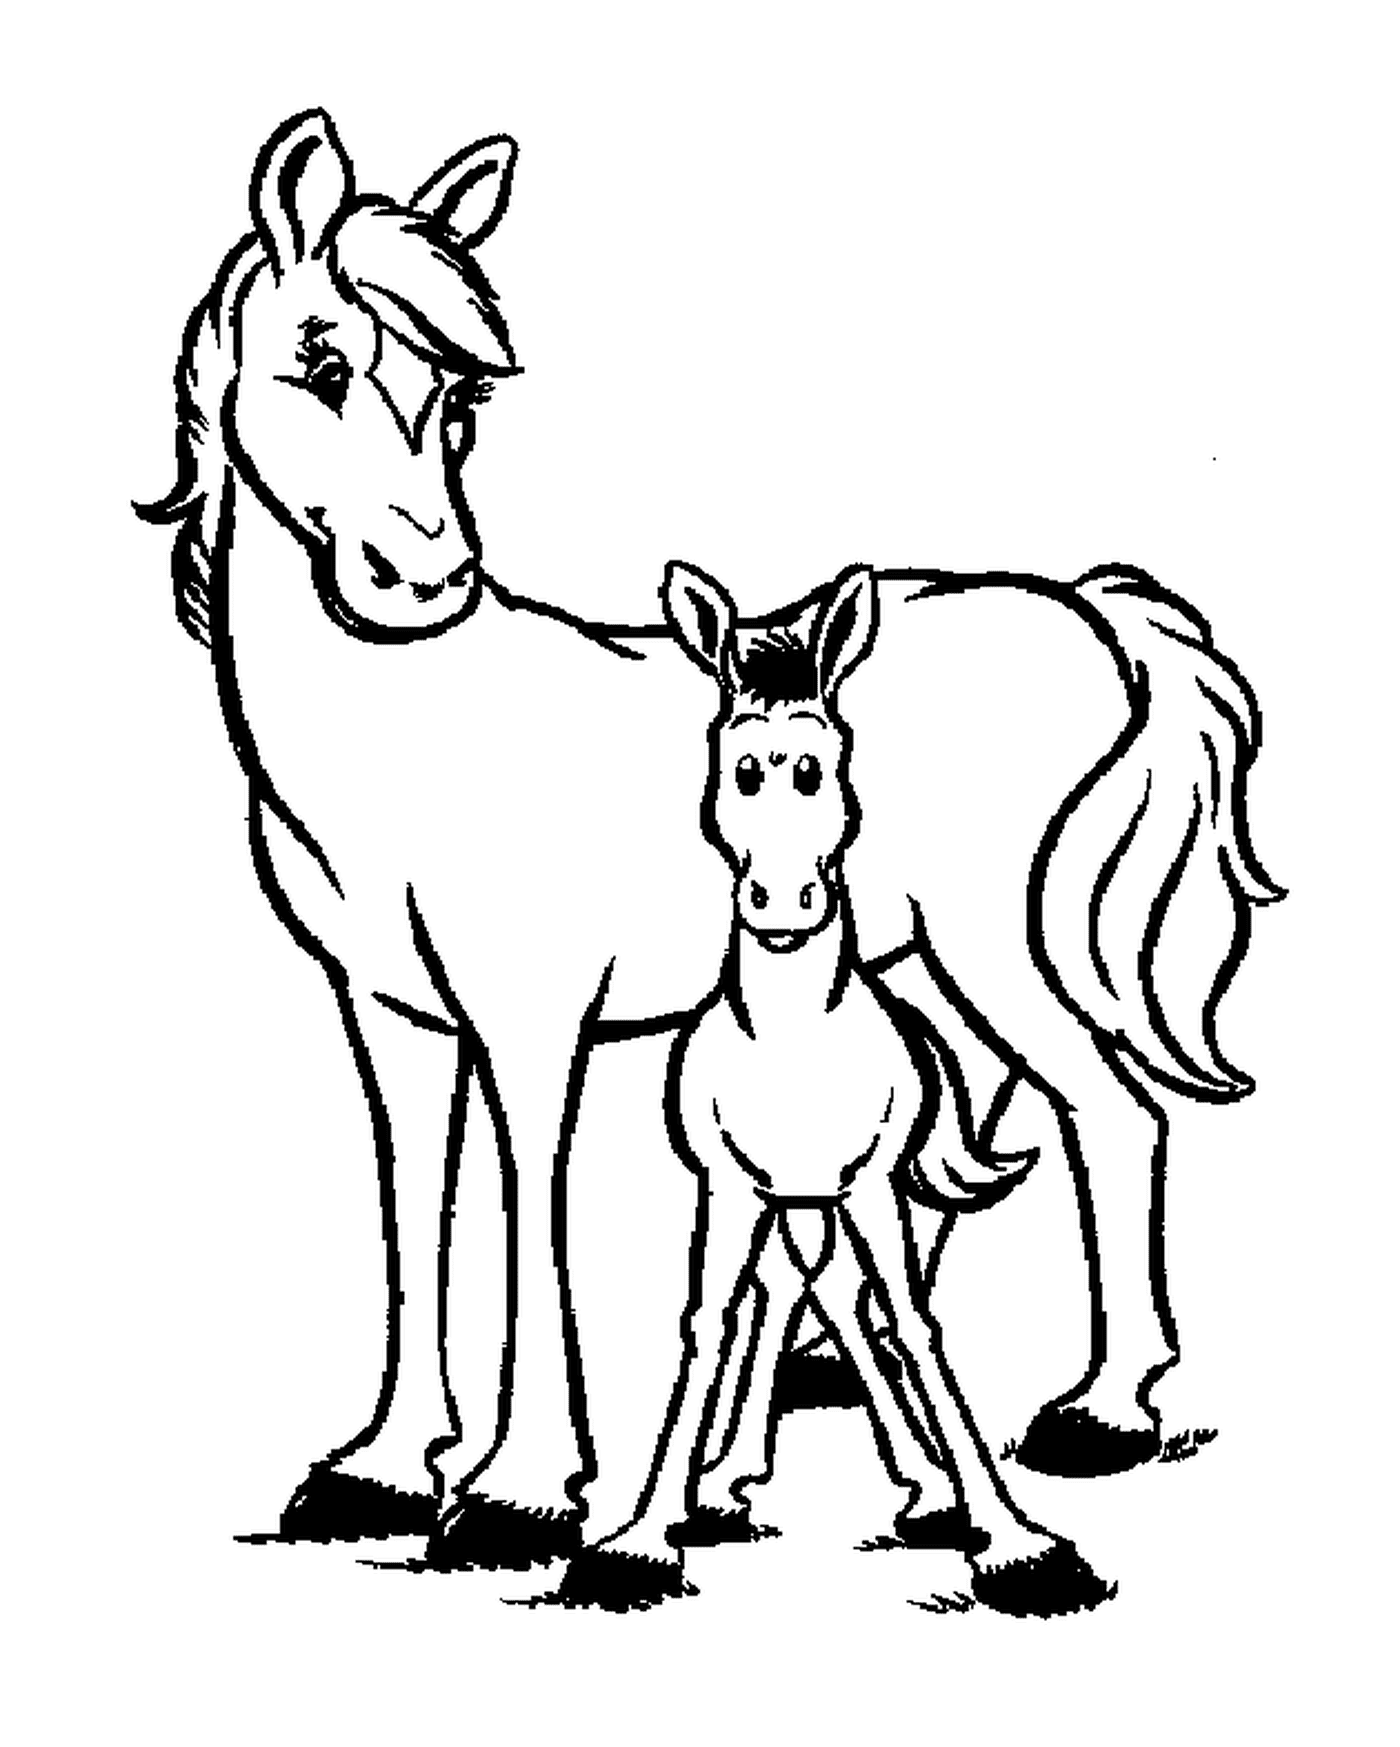  Horse duo: an adult and a foal 